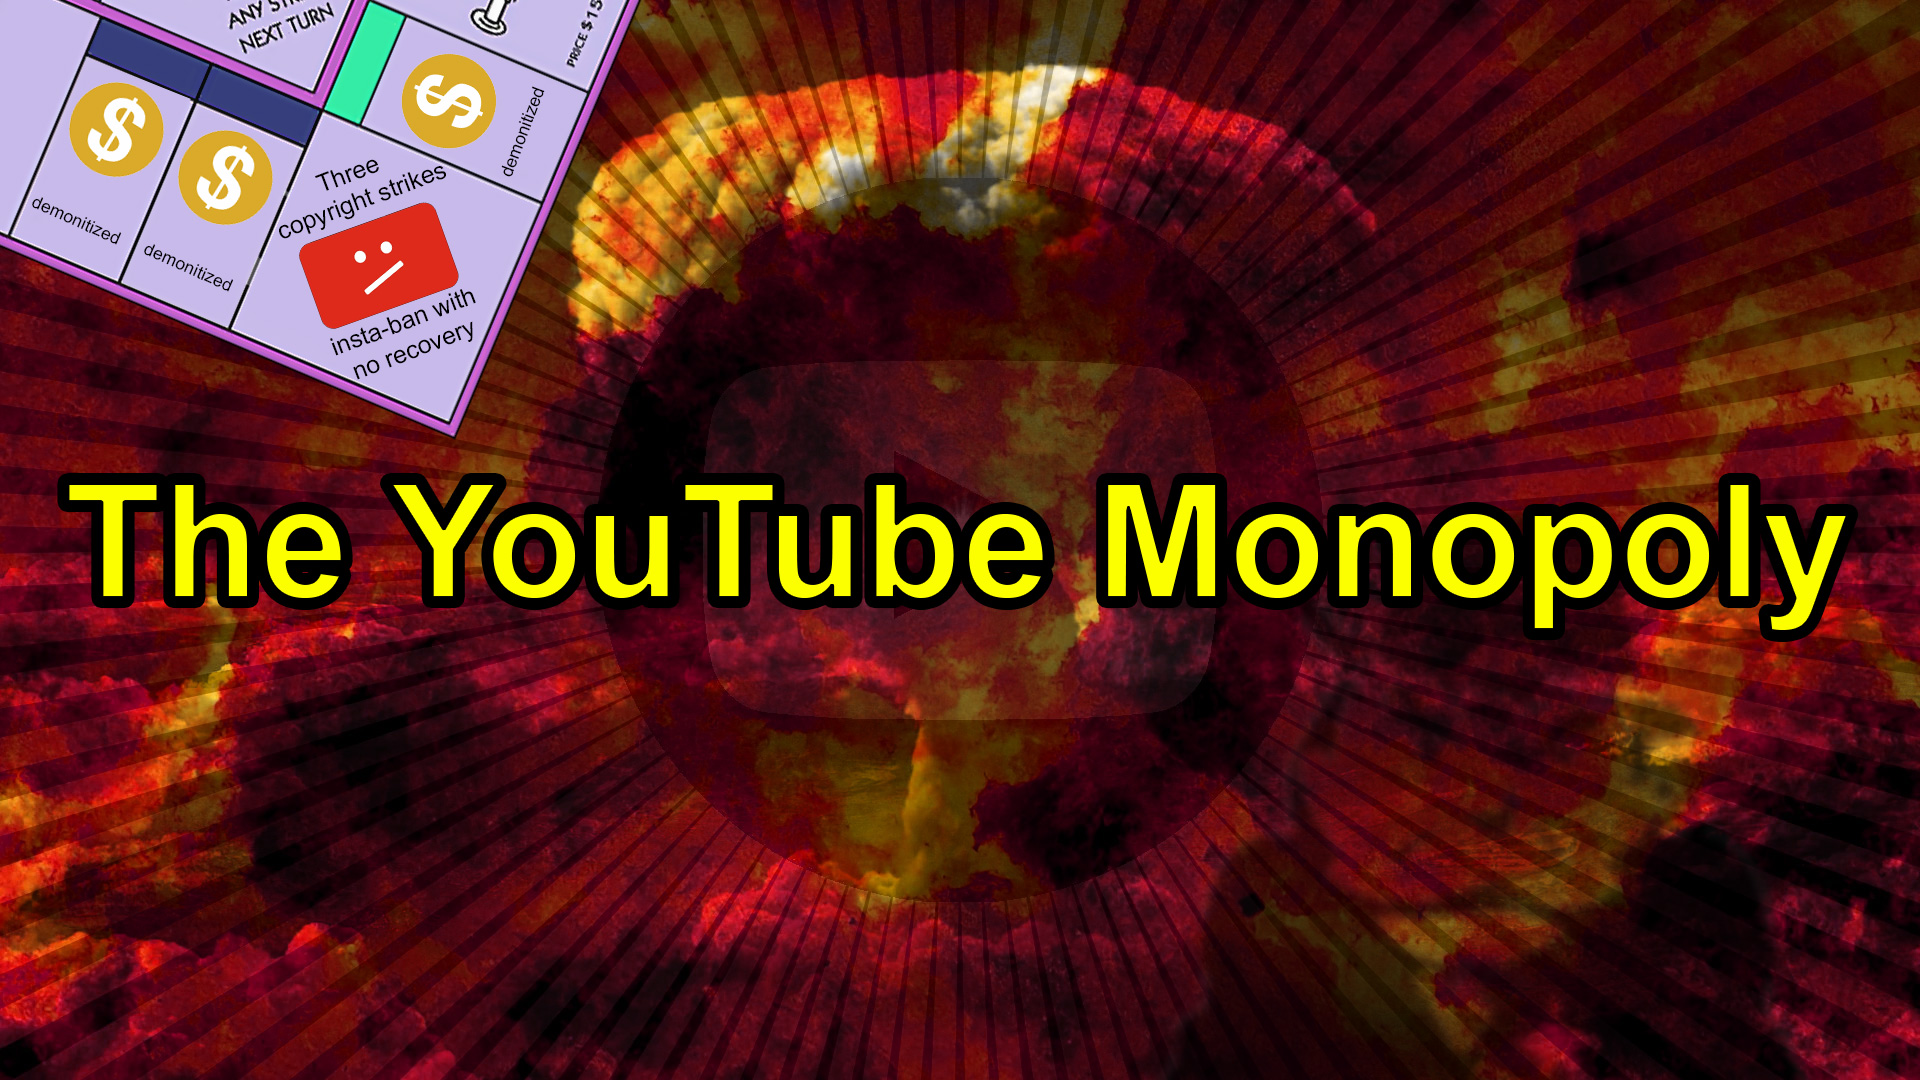 The YouTube Monopoly.